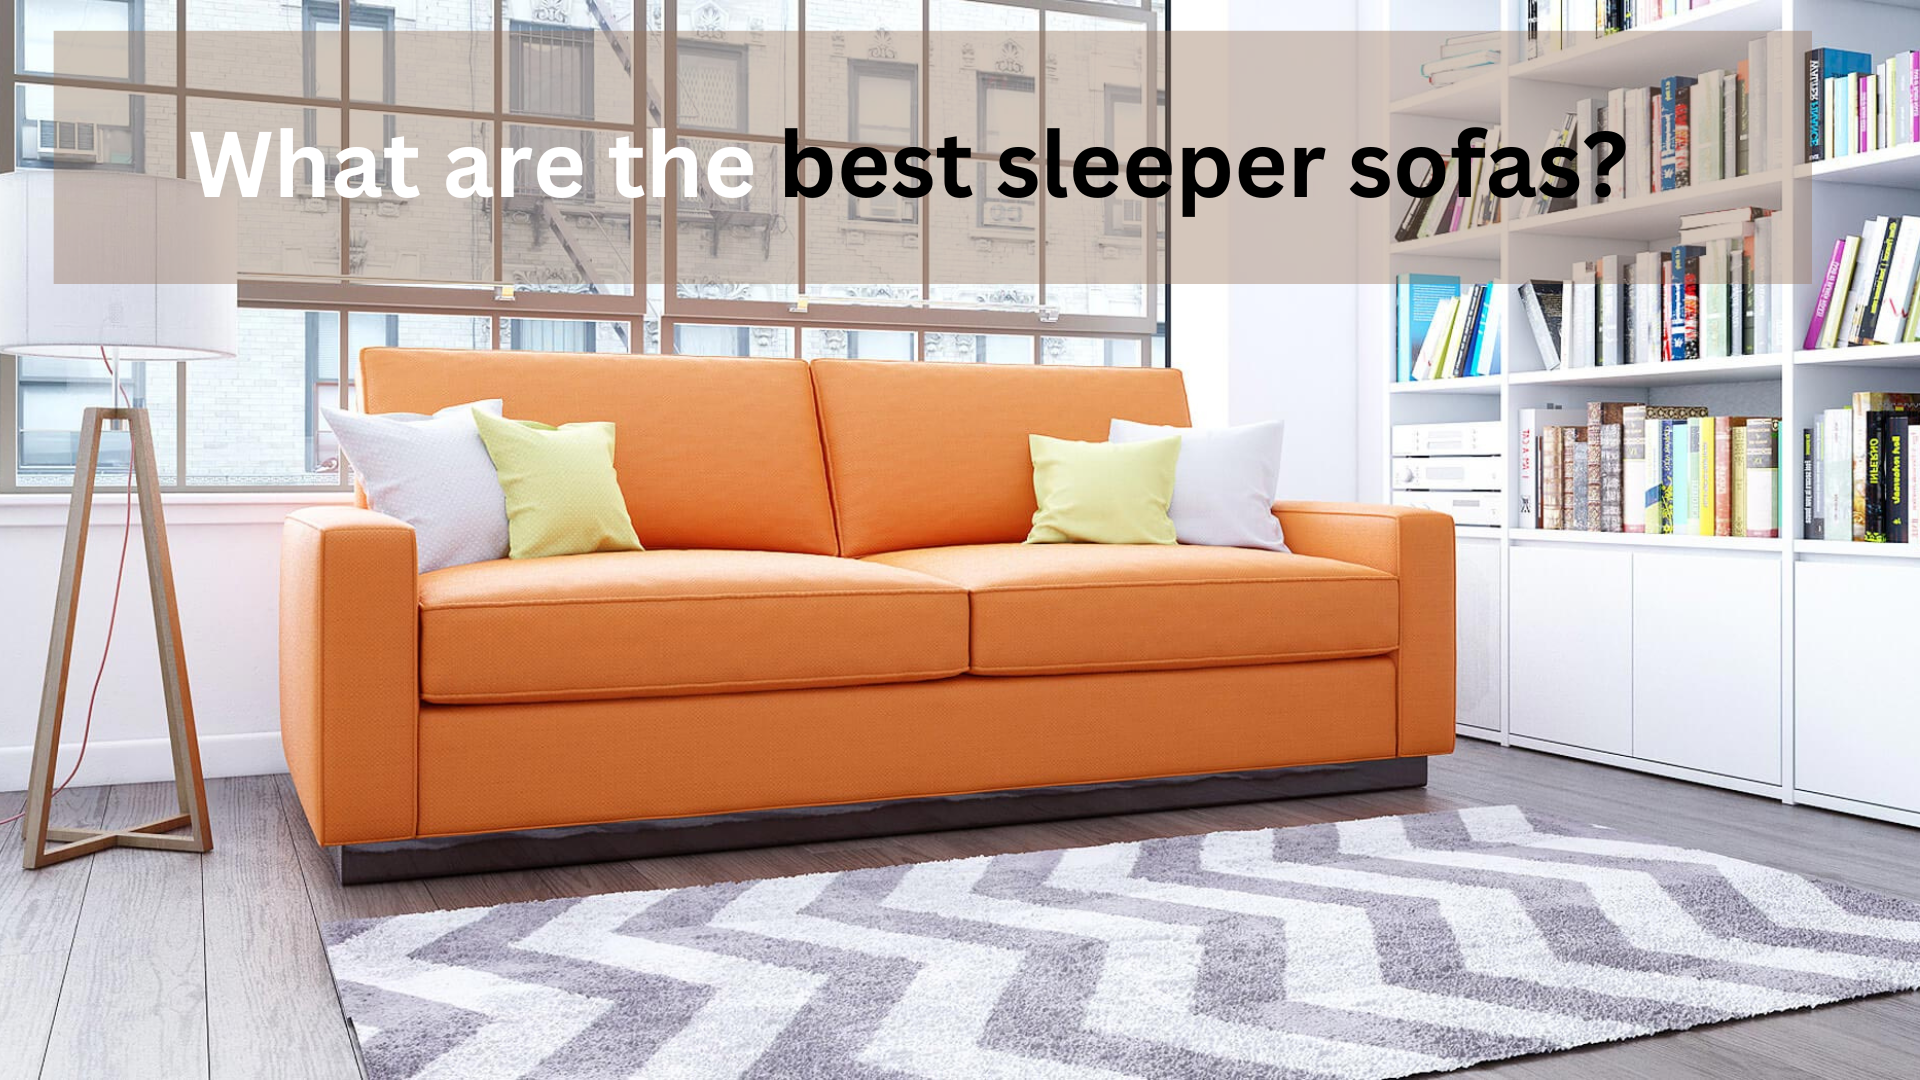 What are the best sleeper sofas